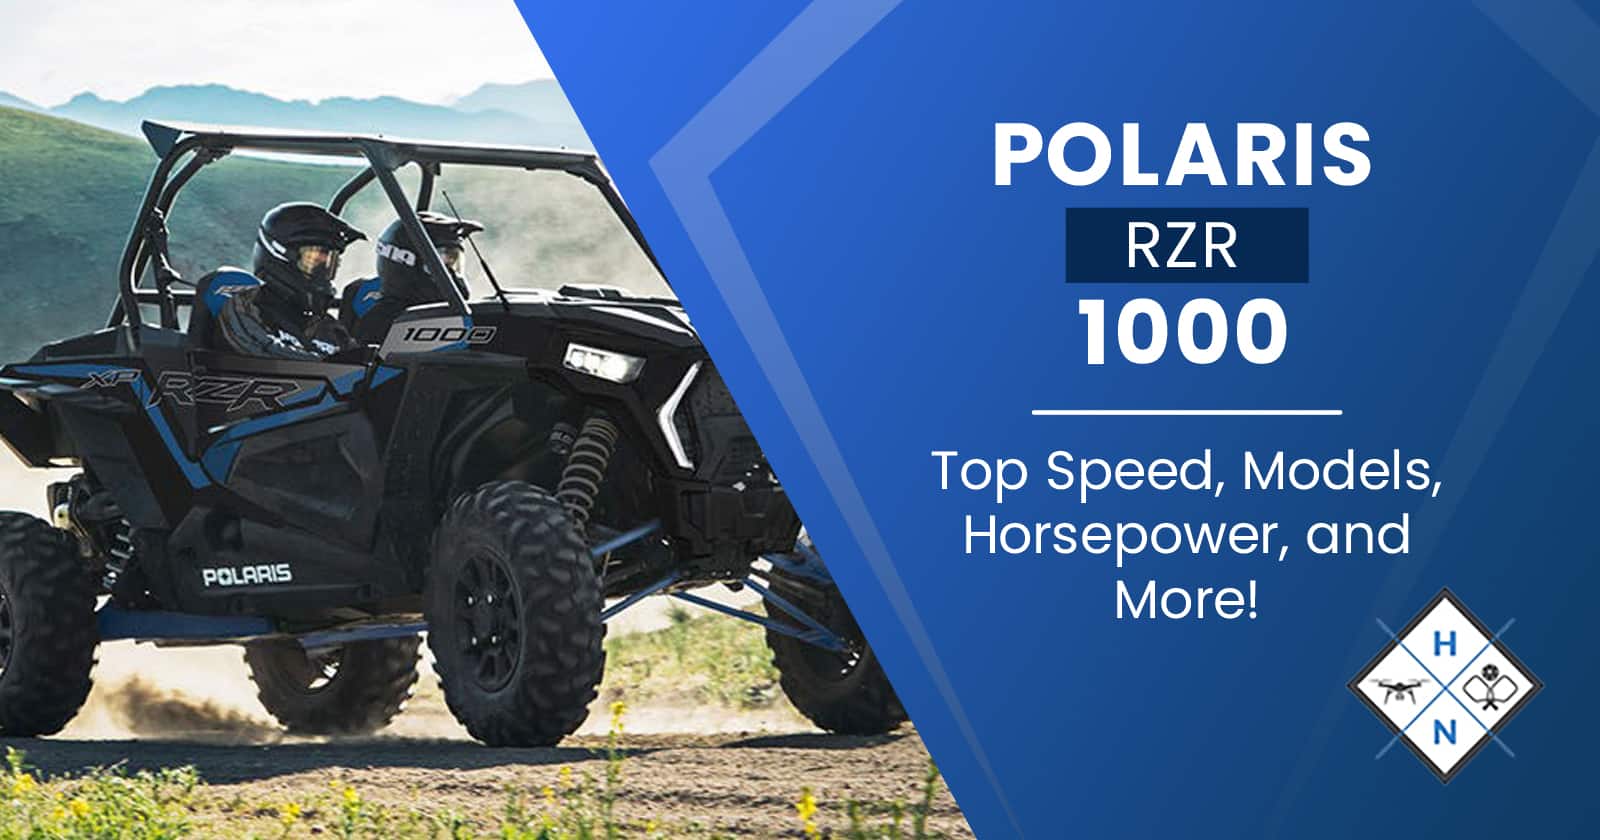 Polaris Rzr 1000: Top Speed, Models, Horsepower, and More!